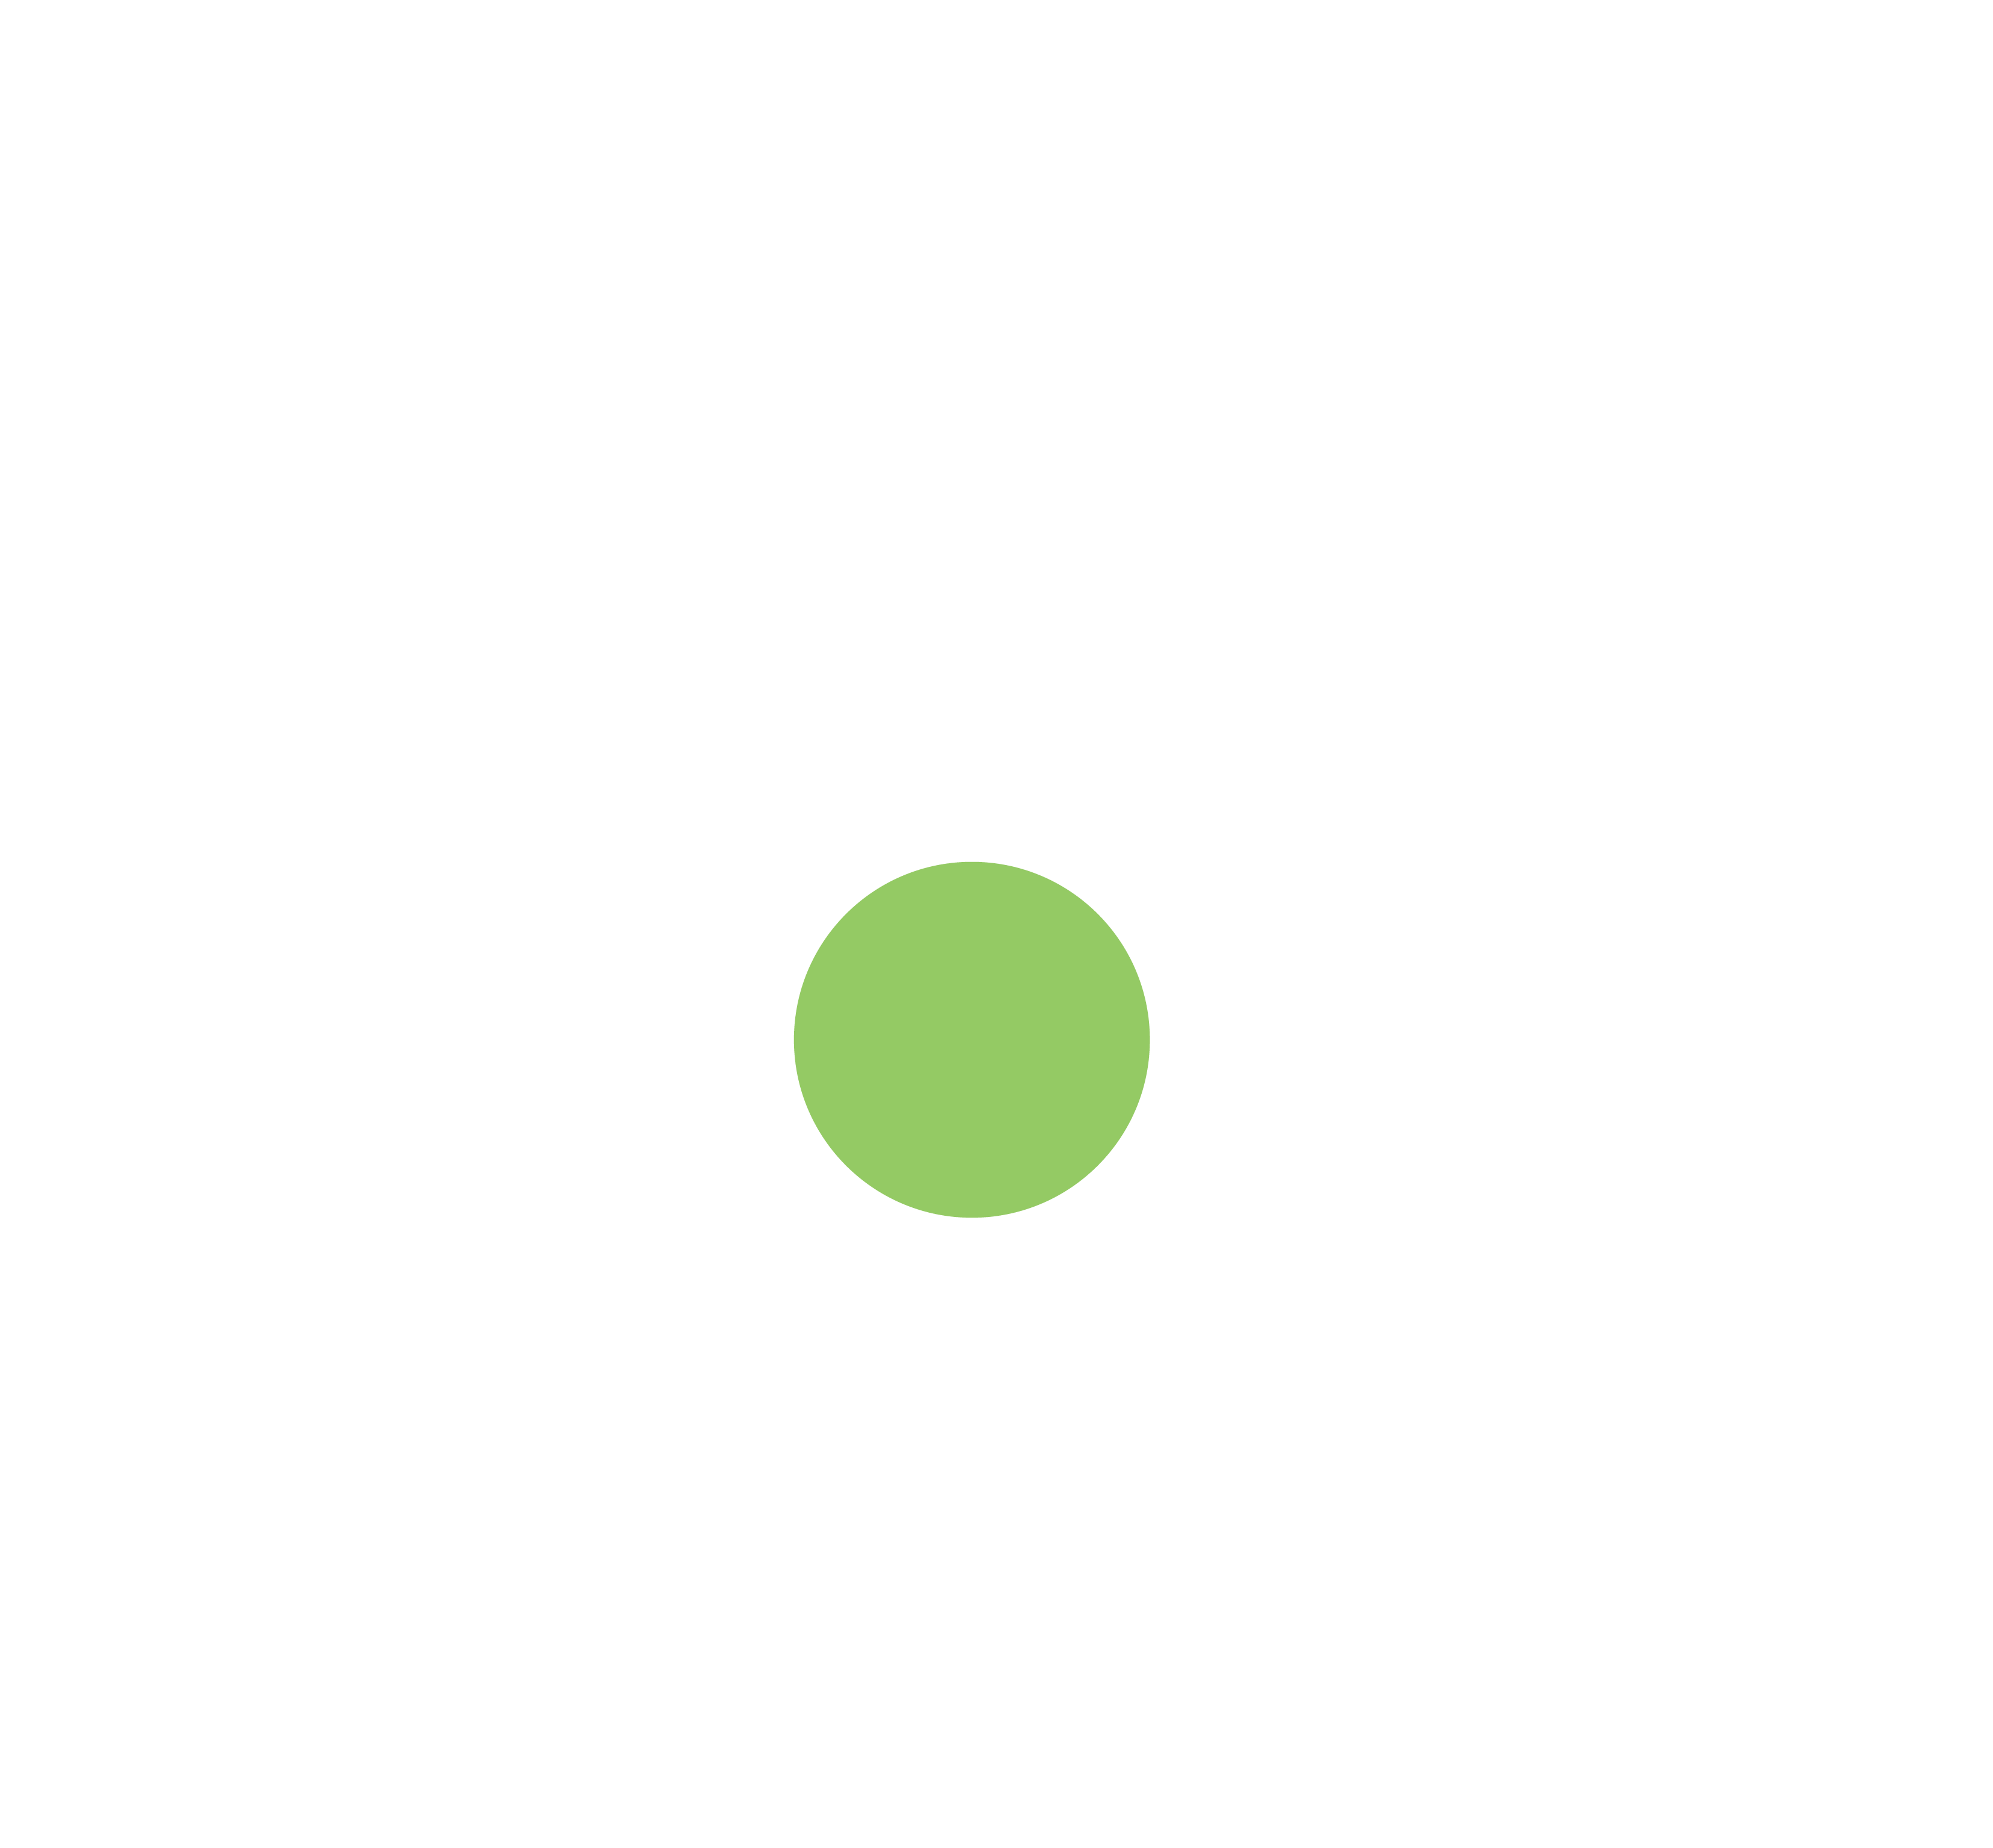 Supporting Economic Prosperity for YOU and Greater Houston